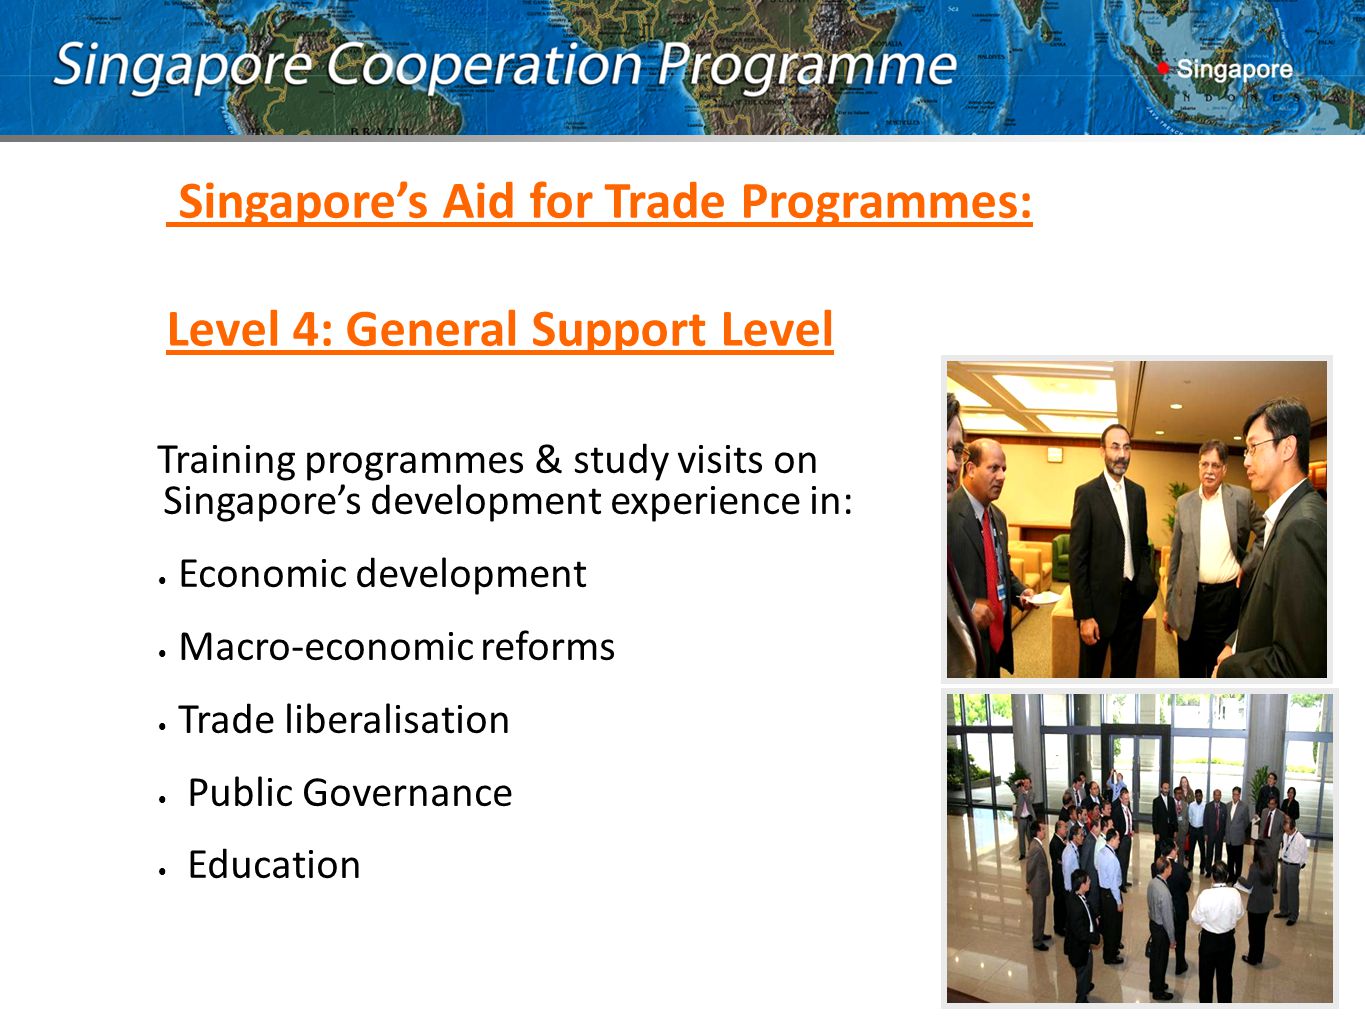 Training programmes & study visits on Singapore’s development experience in: Economic development Macro-economic reforms Trade liberalisation Public Governance Education Singapore’s Aid for Trade Programmes: Level 4: General Support Level